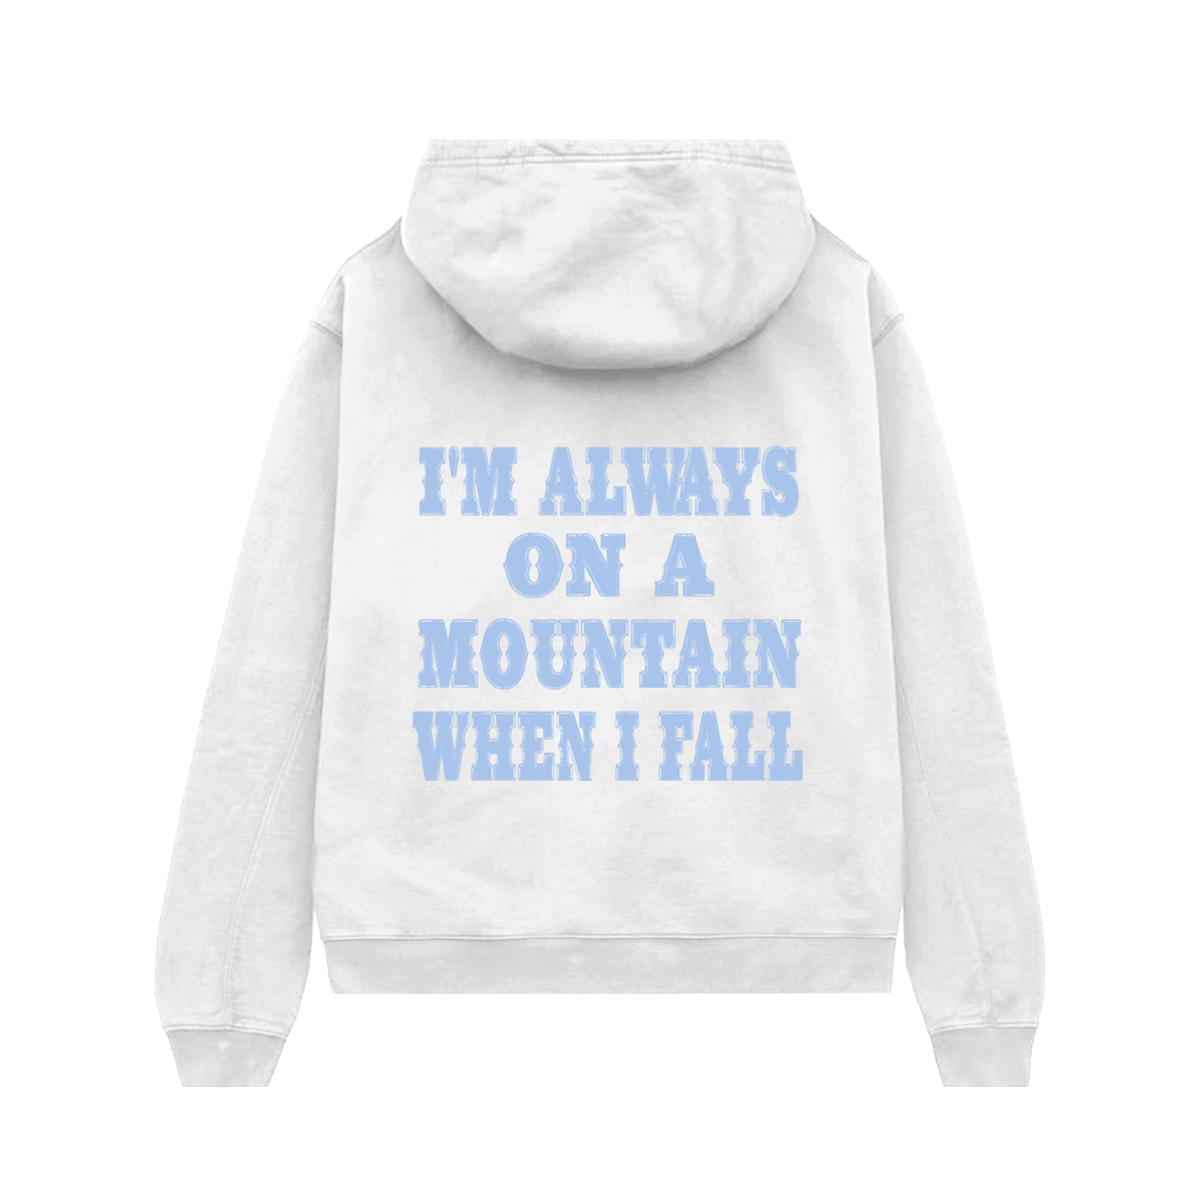 MOUNTAIN HOODIE CROPPED (WHITE)